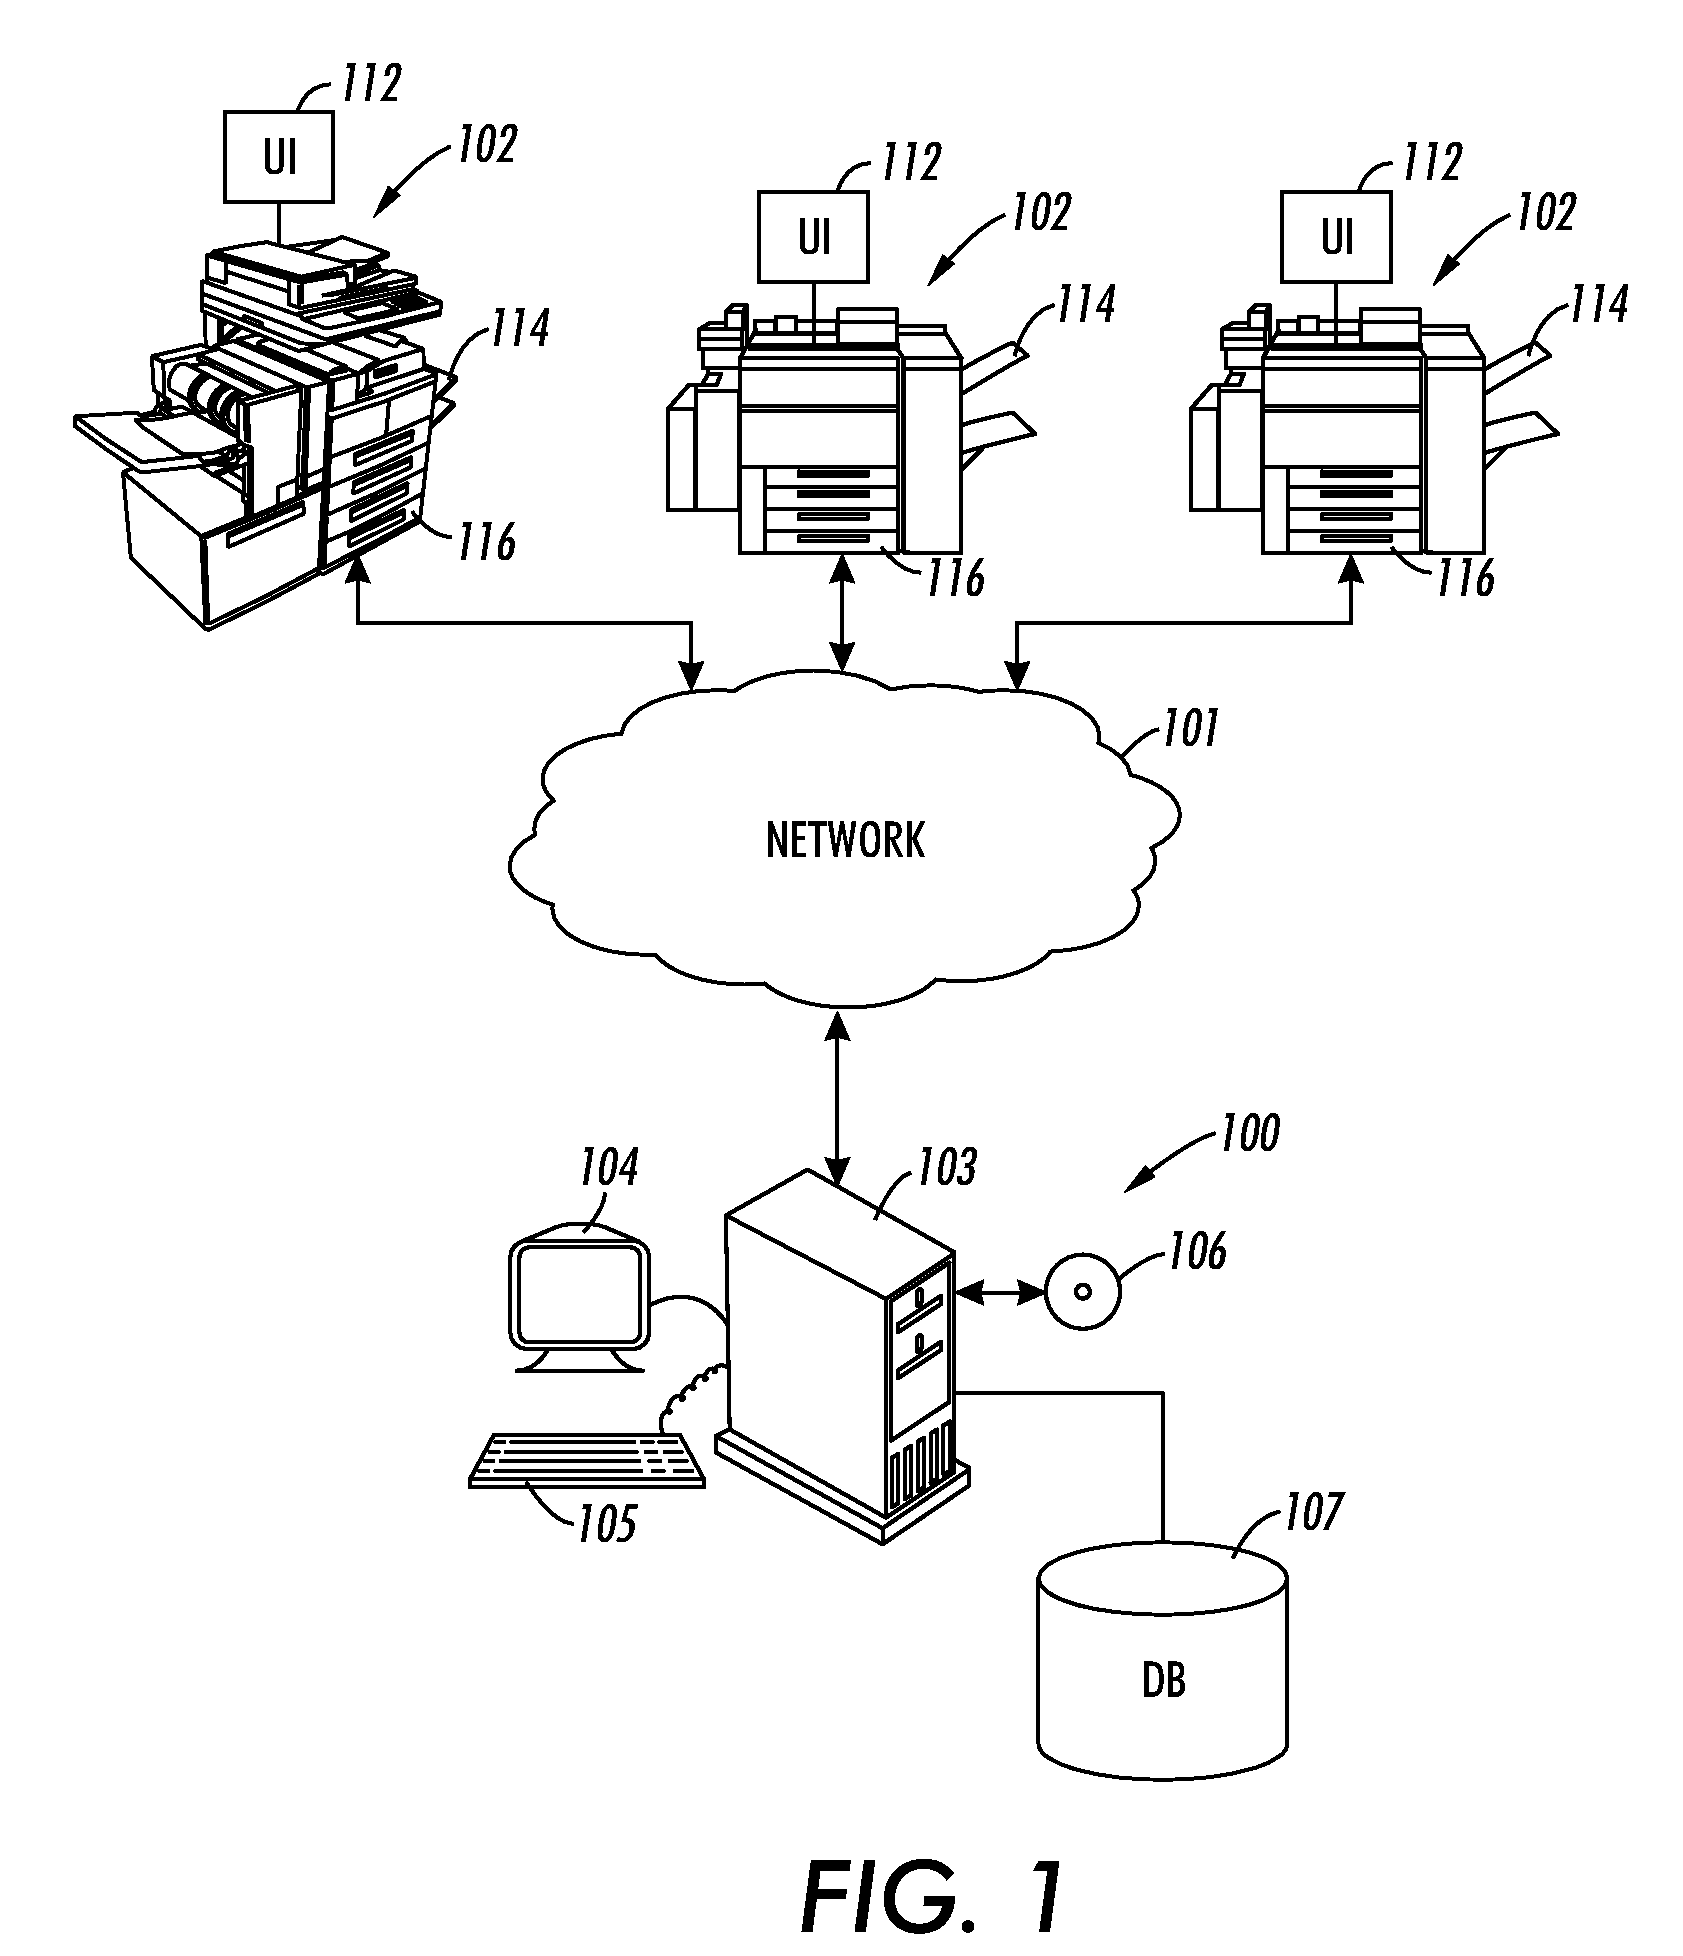 Sharing service applications across multi-function devices in a peer-aware network